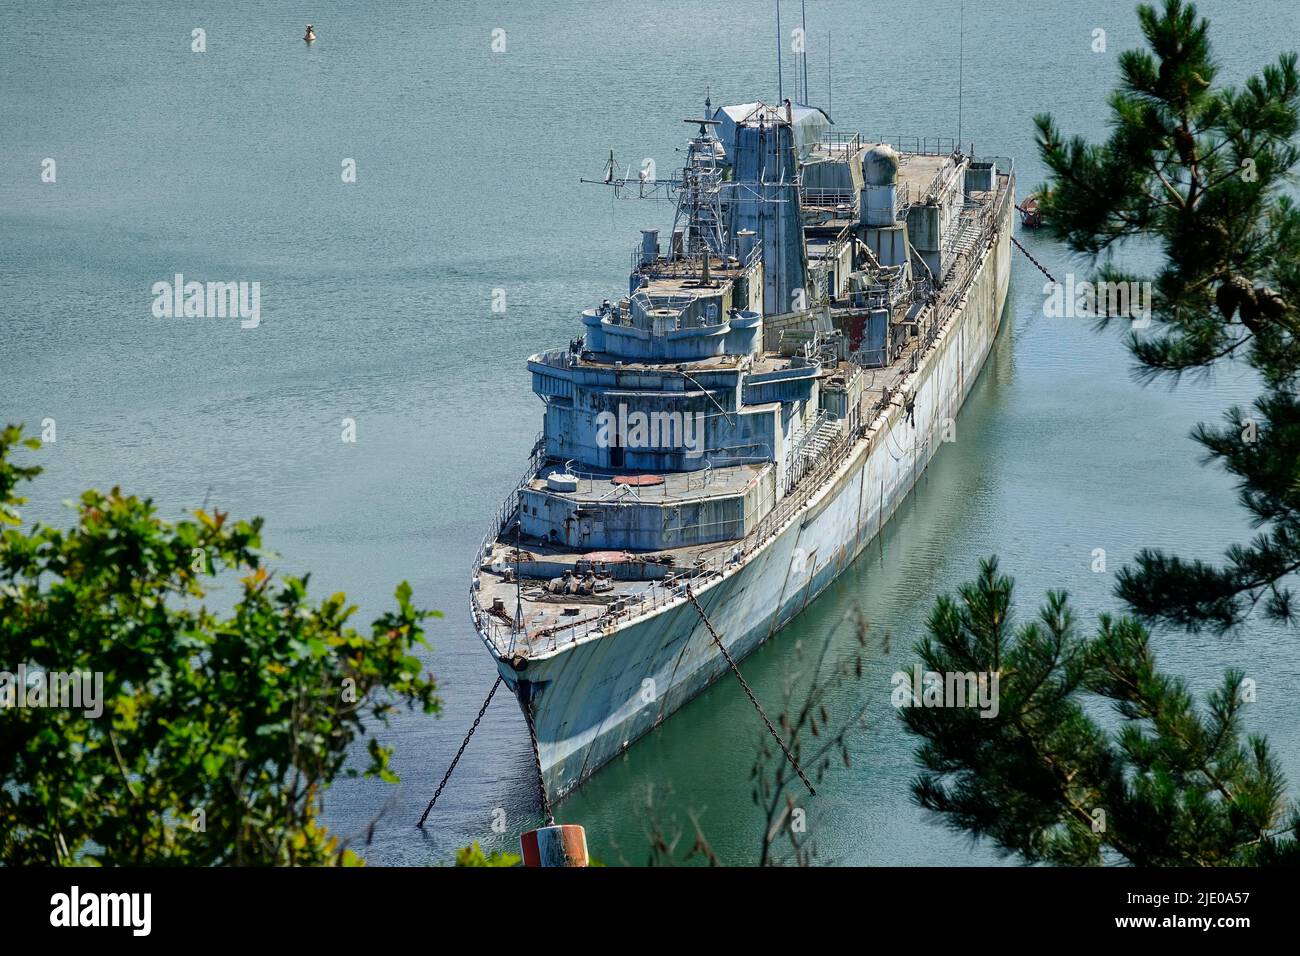 Former frigate Duguay-Trouin, specialised as a submarine hunter, French Navy ship graveyard, Cimetiere des navires de Landevennec in a meander of Stock Photo